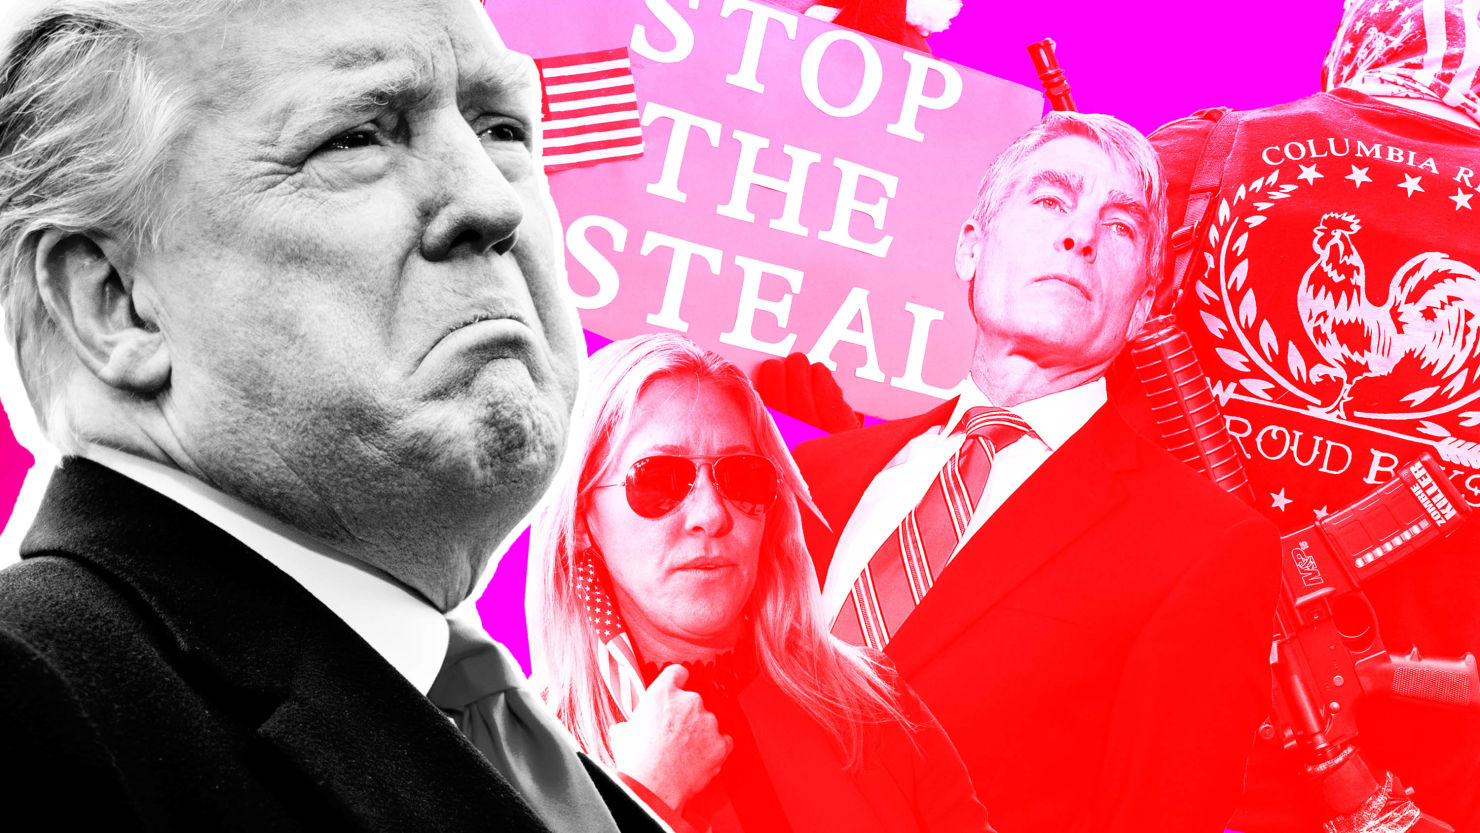 Trump plans to fight the elections even after the “Stop the Steal” rally ends